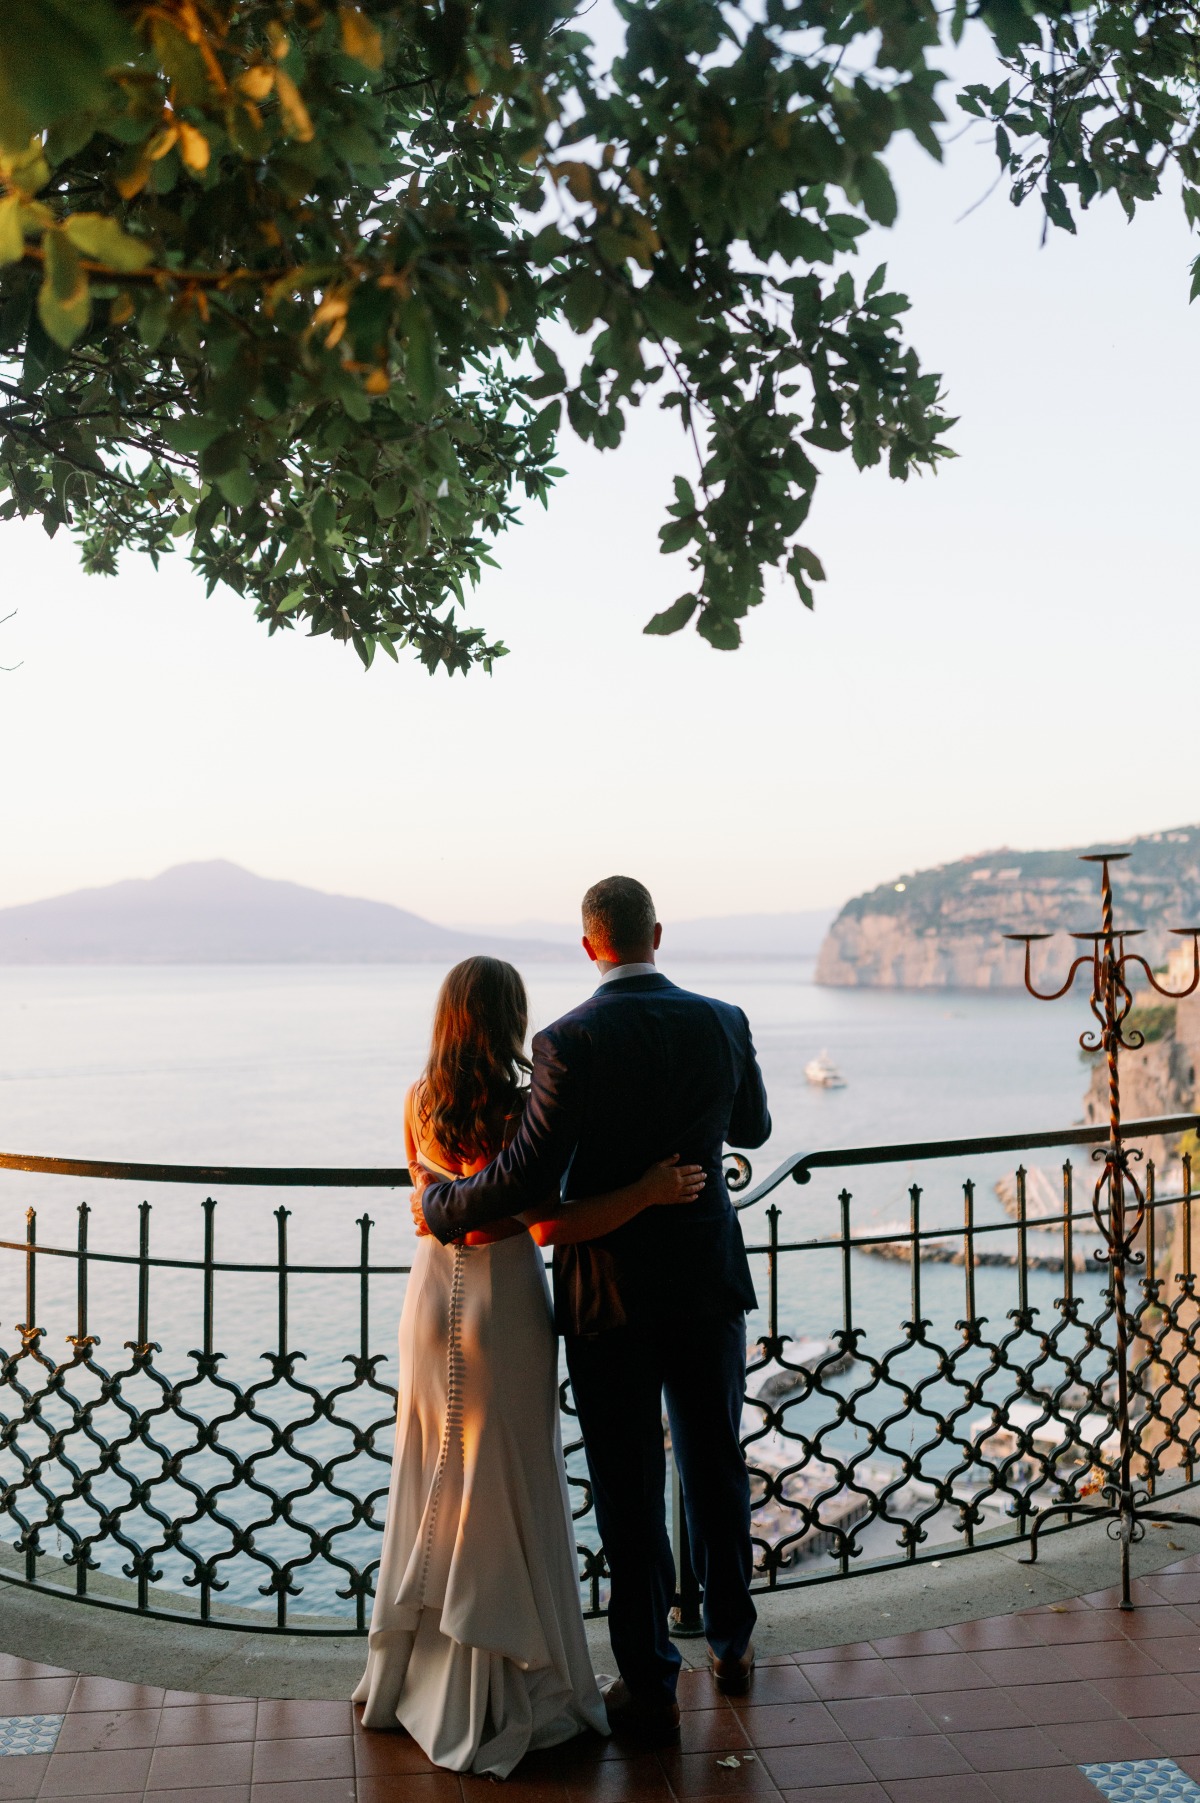 Bride and groom watching sunset in Italy